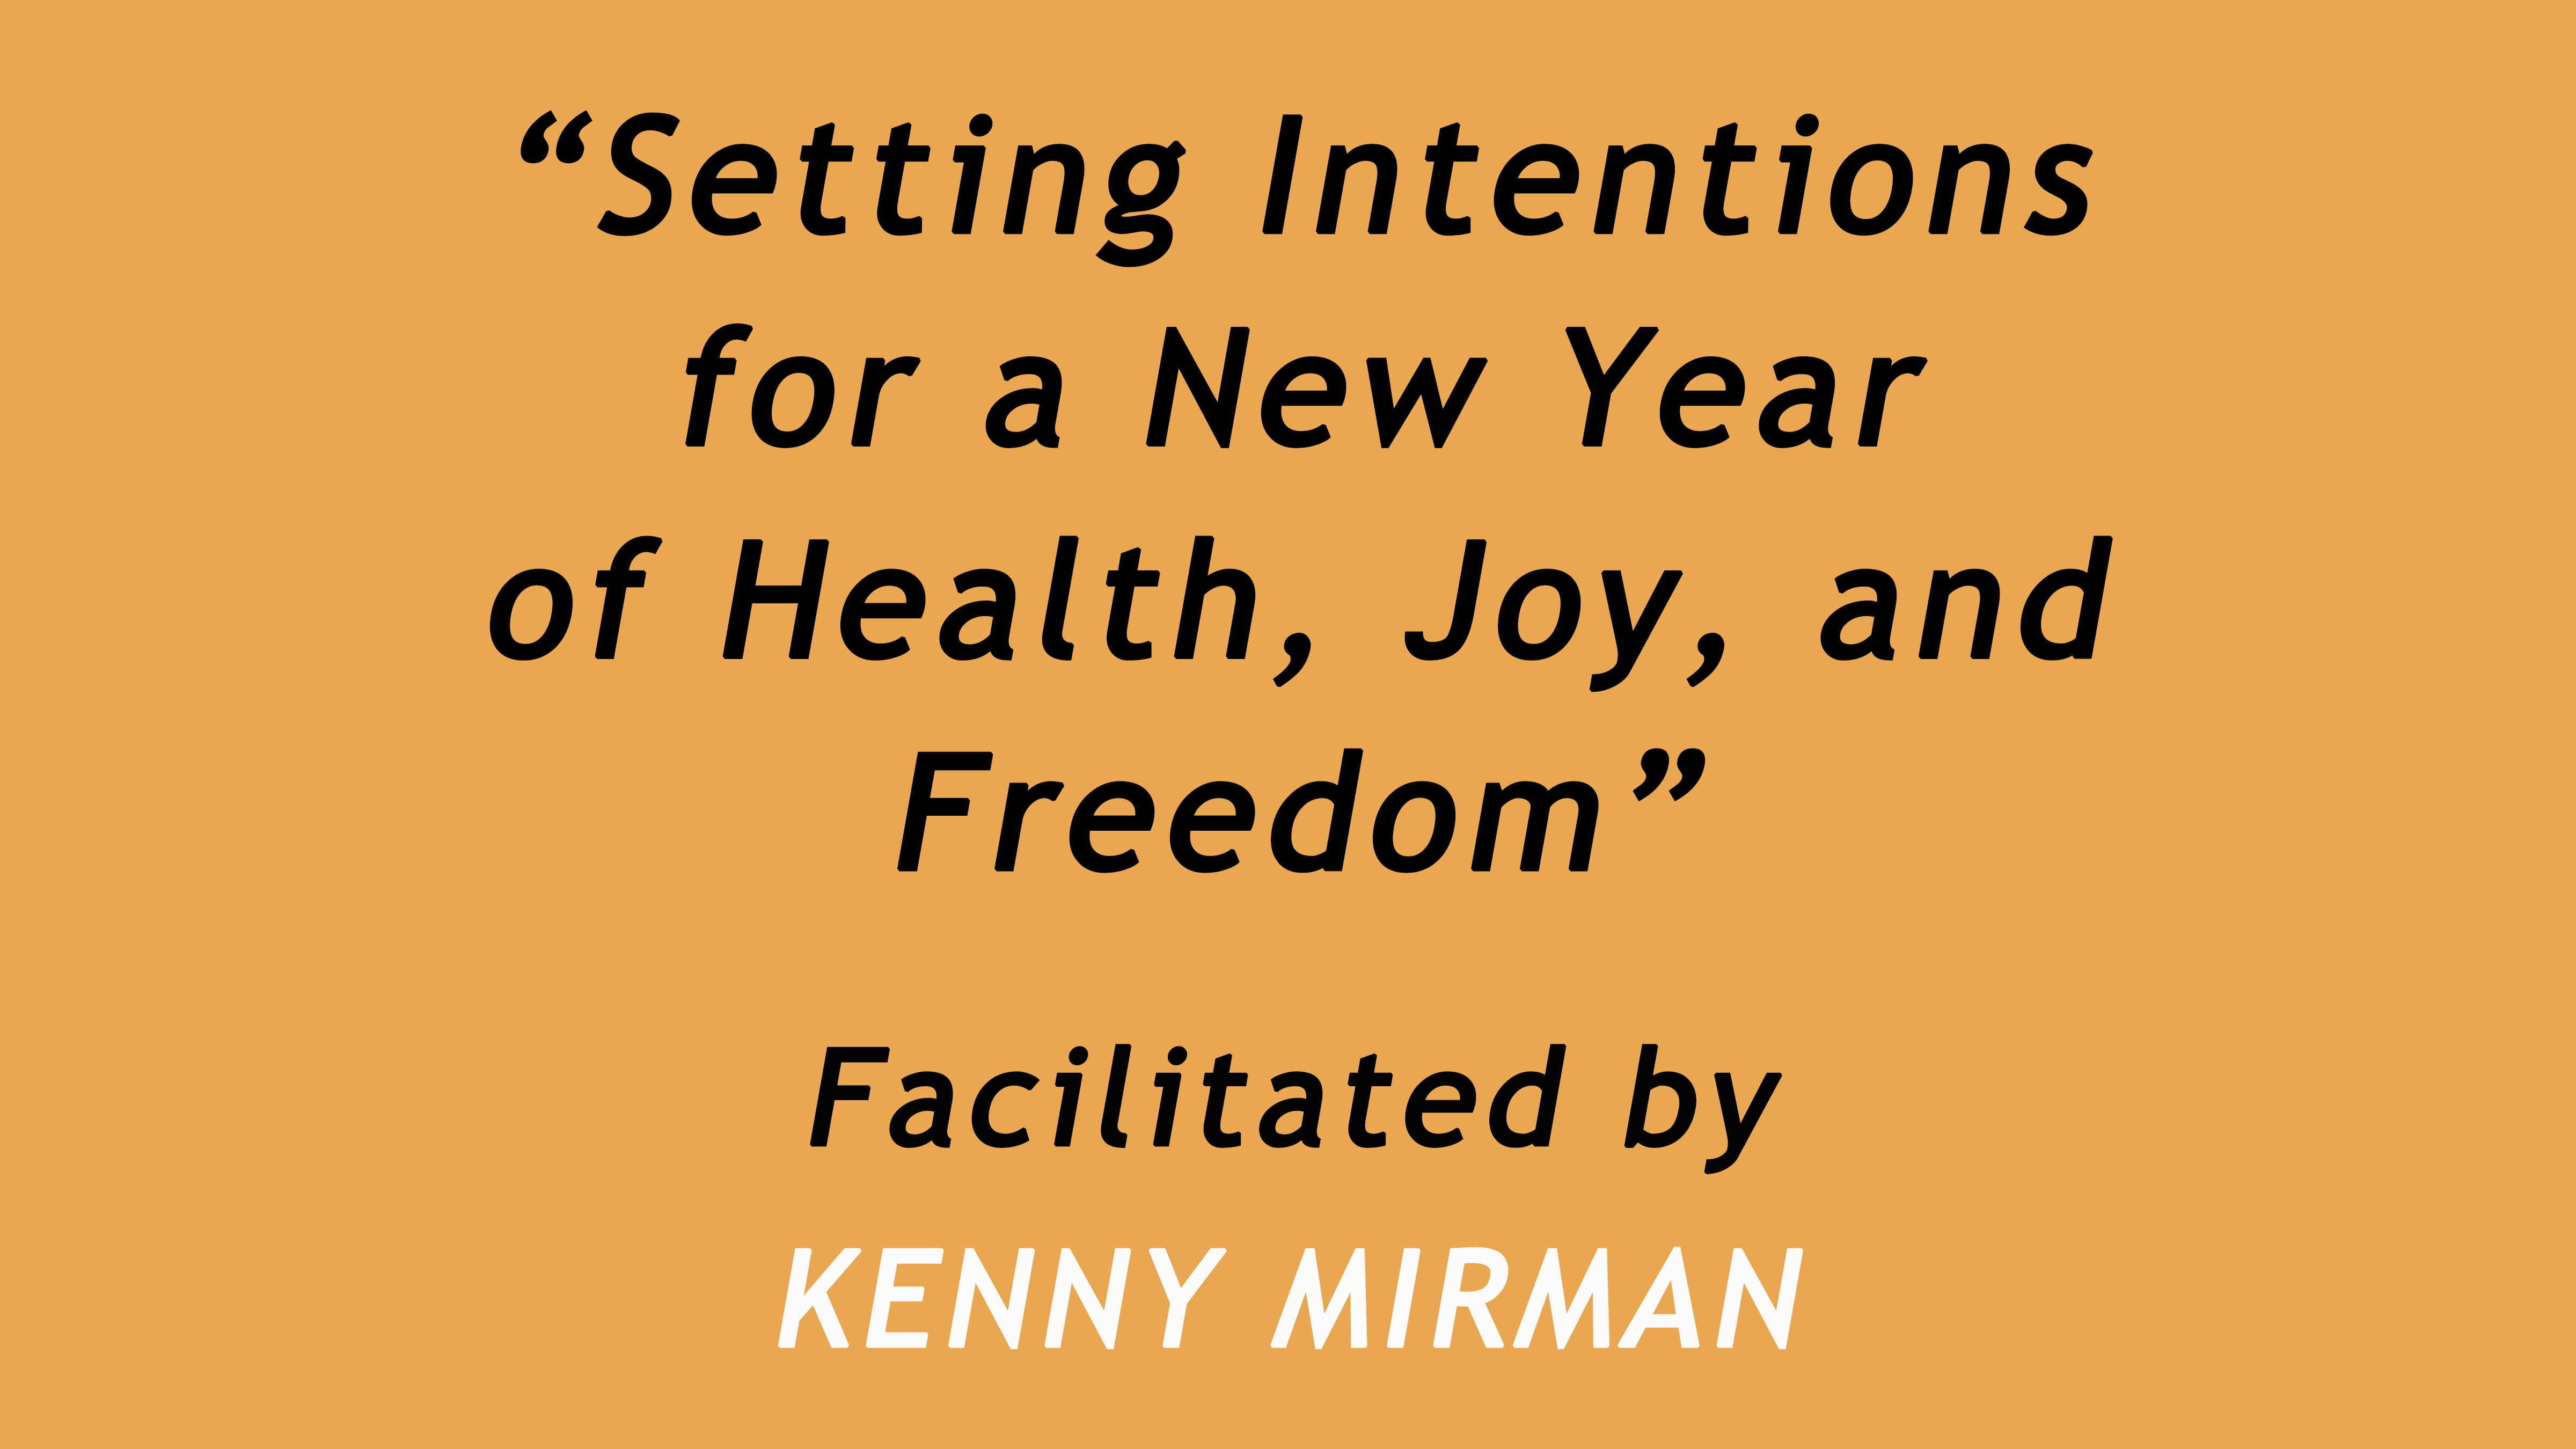 Setting Intentions for a New Year of Health, Joy, and Freedom. Facilitated by Kenny Mirman